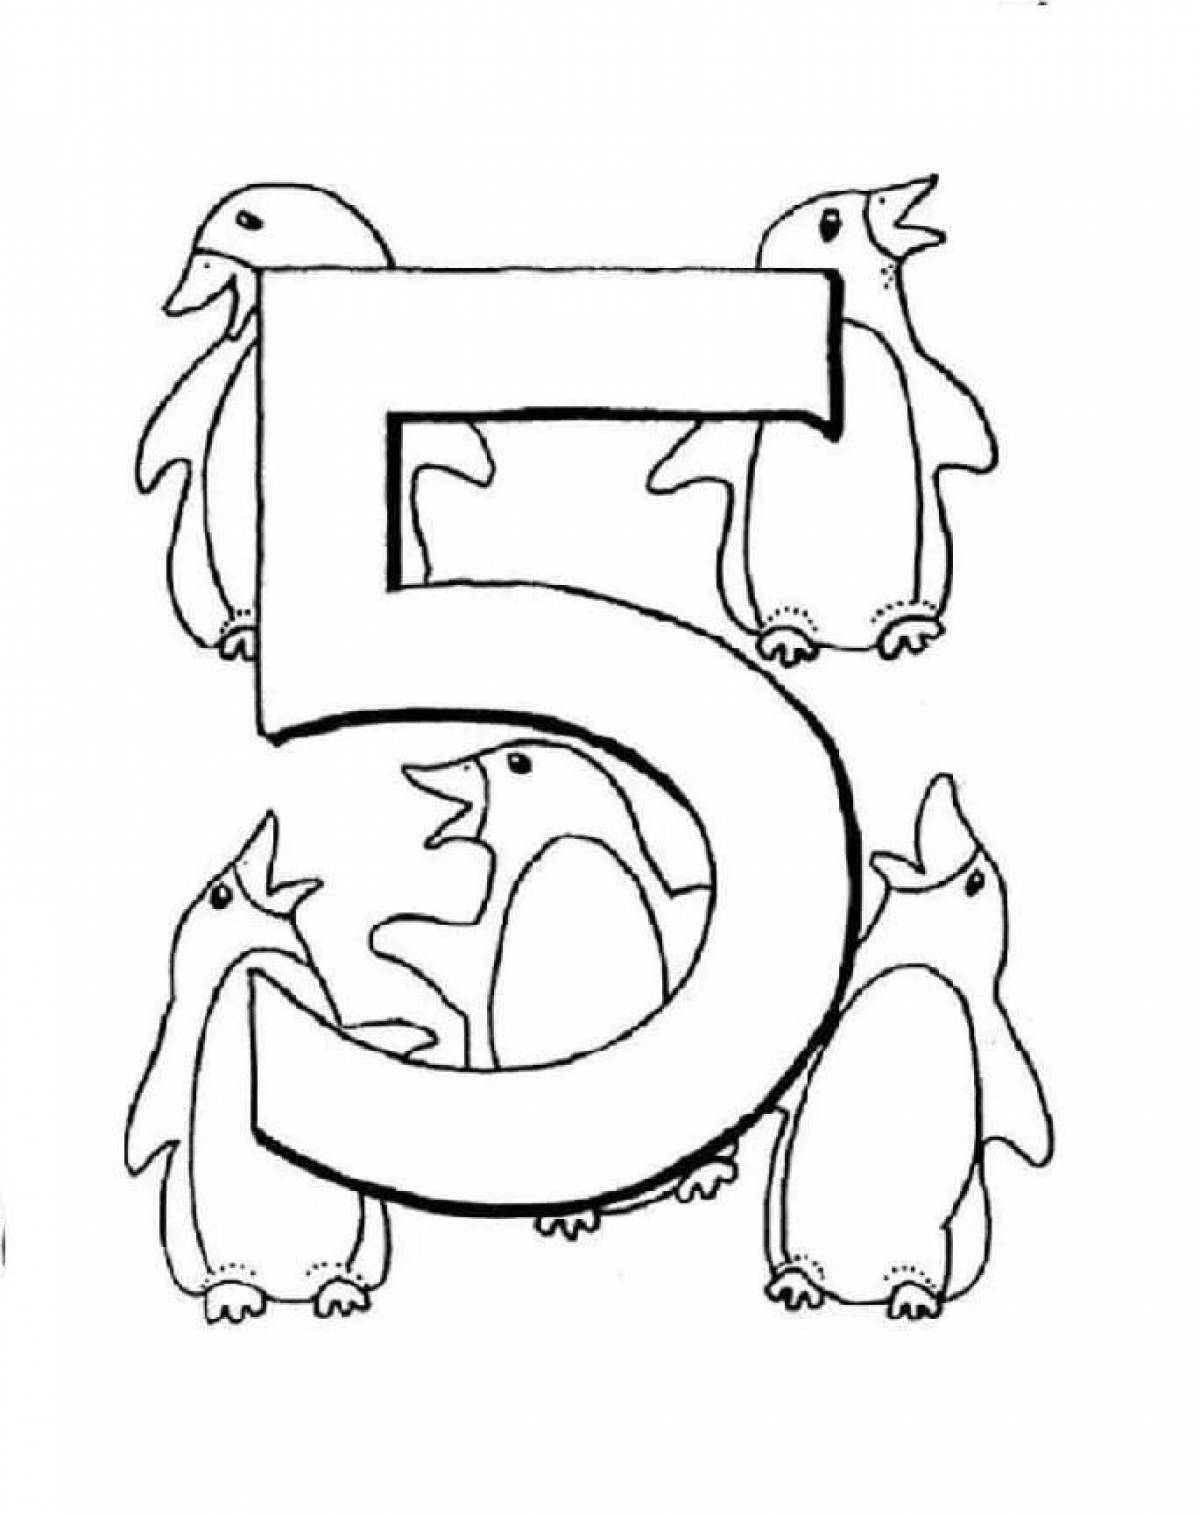 Joyful number 5 coloring pages for kids